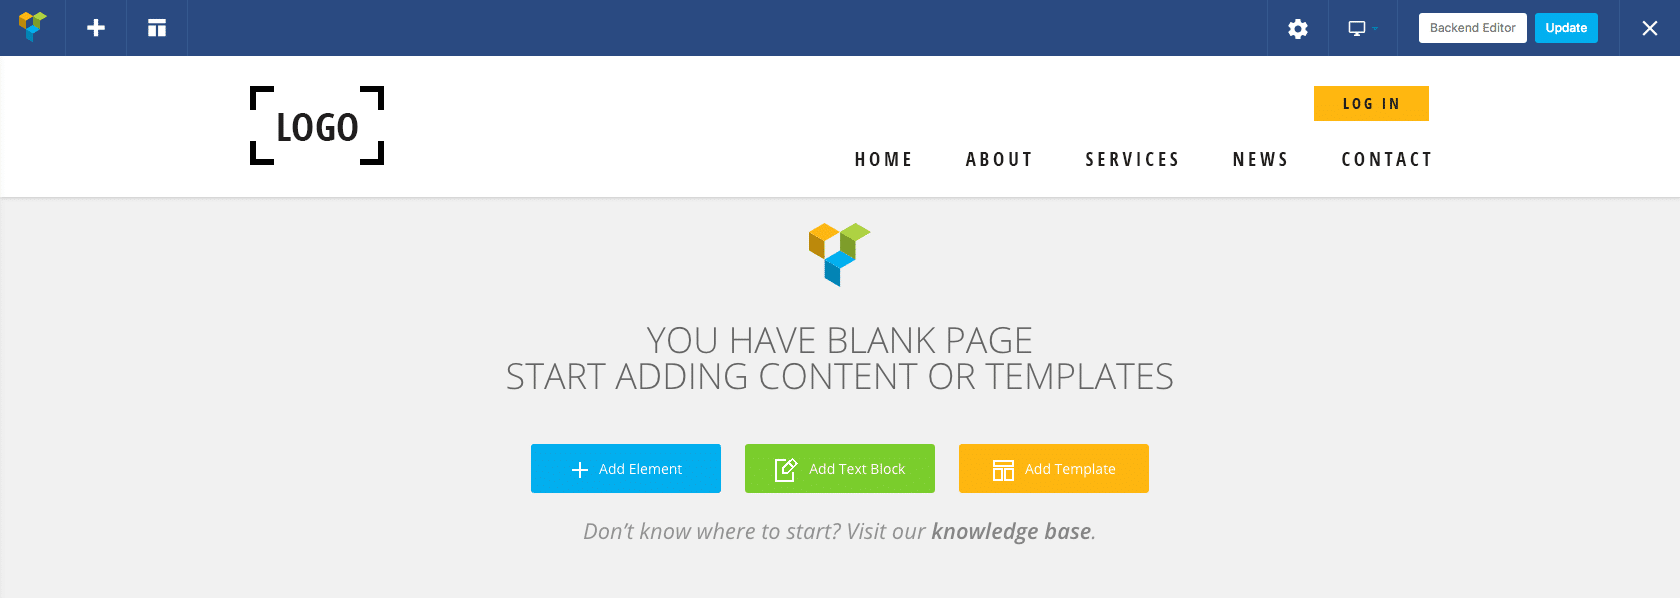 Using visual composer templates you have 